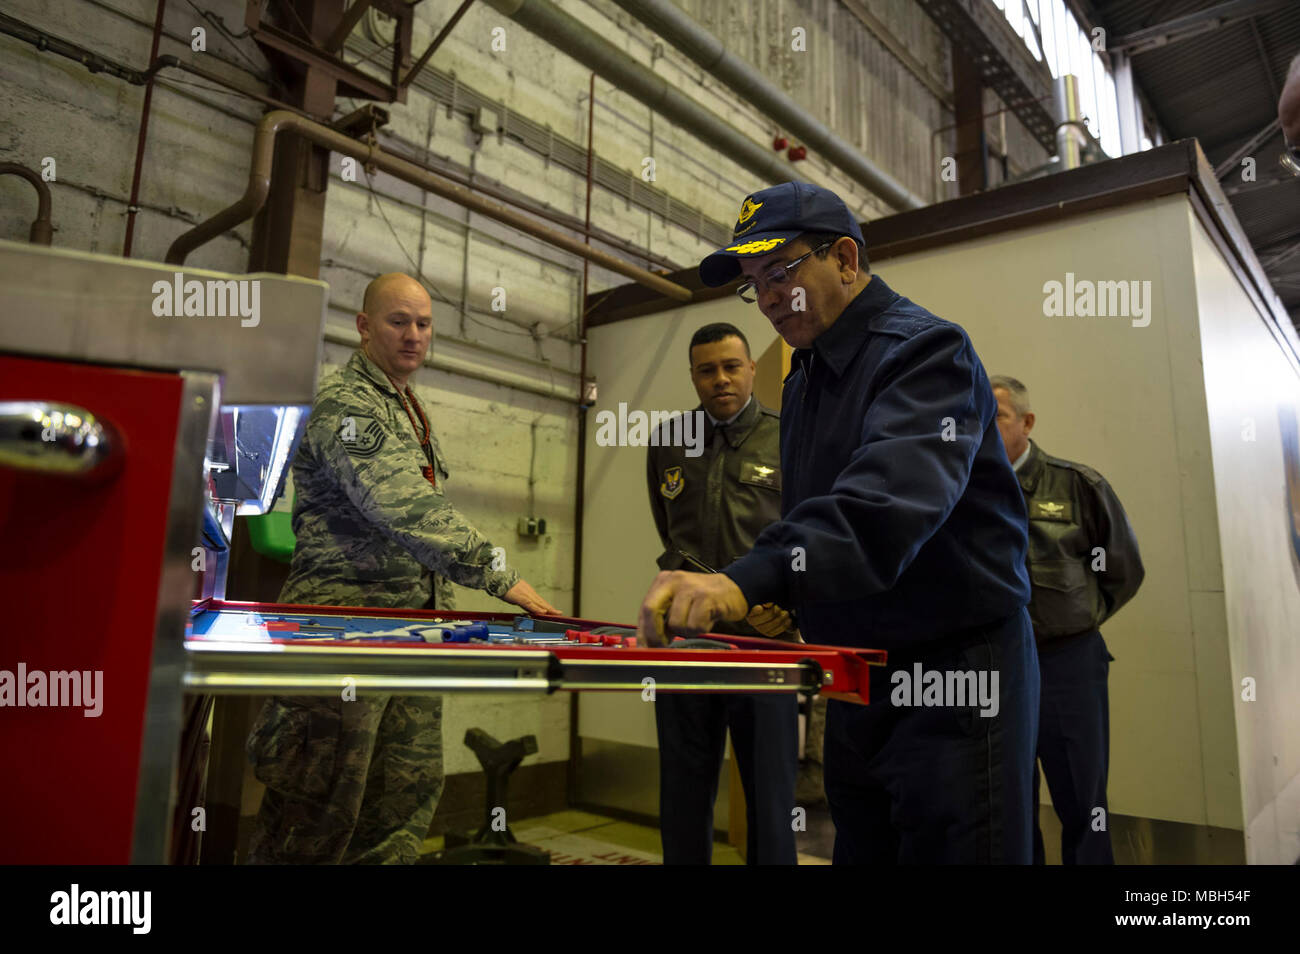 Maj. Gen. Hassan Fakri, Royal Moroccan Air Force deputy inspector, examines an automated toolbox during a tour of Hangar 1 at Spangdahlem Air Base, Germany, March 28, 2018. The visit marked the first time the RMAF has visited the 52nd Fighter Wing, allowing for reinforcement in bilateral relationship as well as a means to identify future security cooperation priorities between the USAF and RMAF. Stock Photo